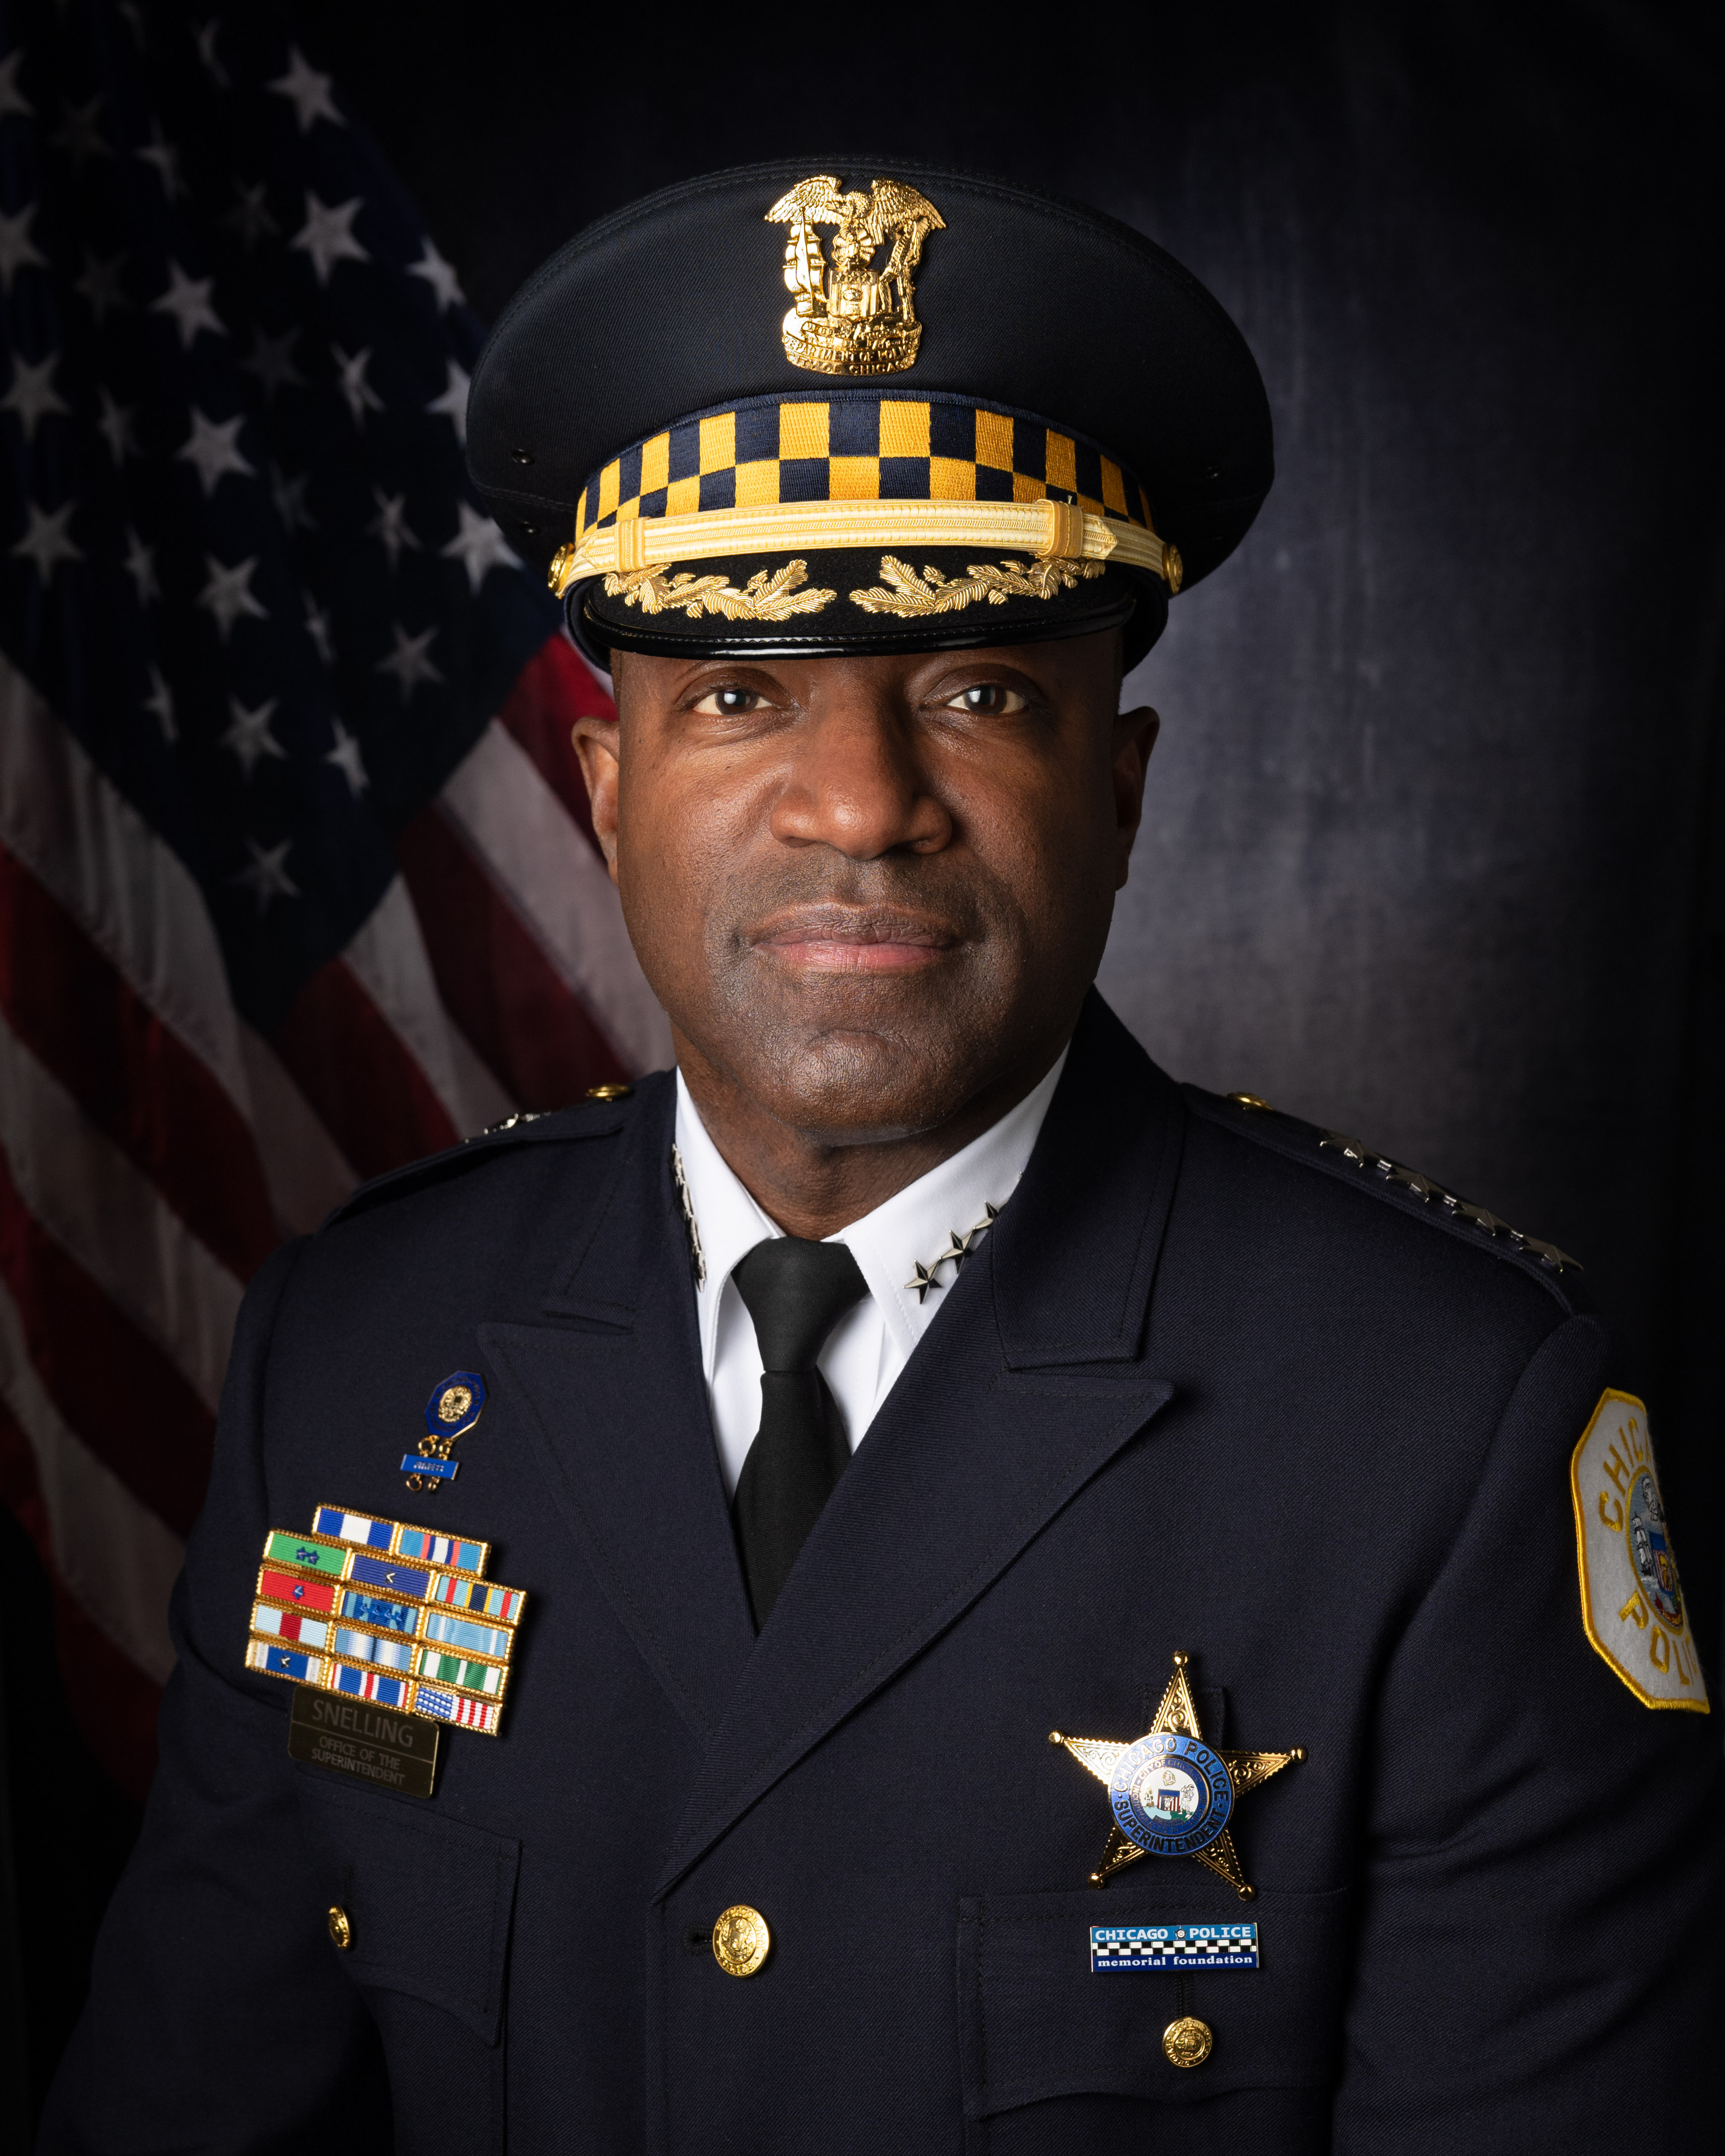 Superintendent of Police Larry B. Snelling